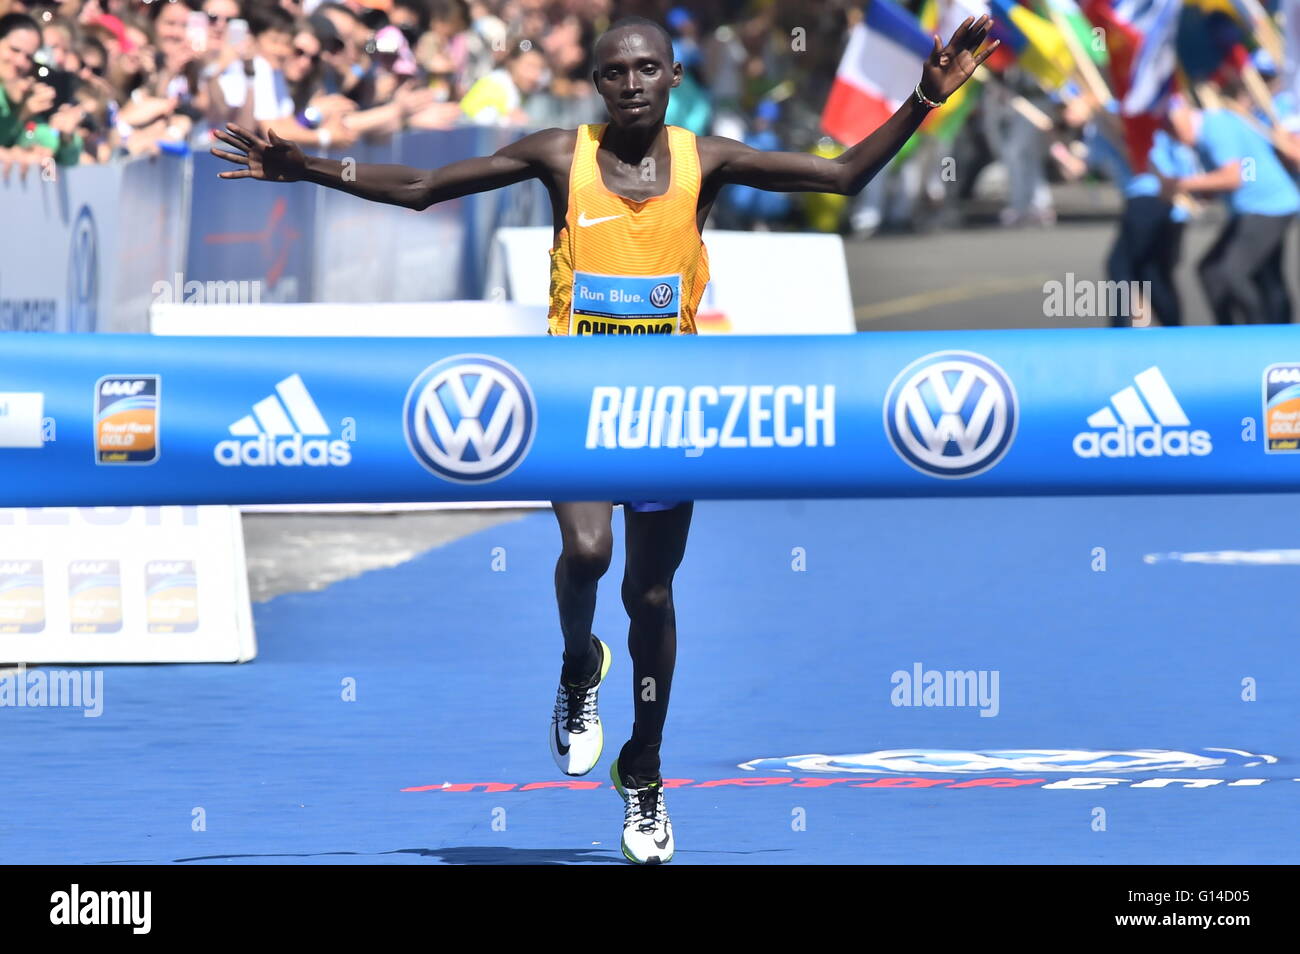 Prague, Czech Republic. 08th May, 2016. Lawrence Cherono (pictured) of Kenya won the Prague Marathon, clocking in 2:07:24 and beating defending Felix Kandie by 50 seconds, and Solomon Kirwa Yego, also of Kenya, who finished third. The winning time today has been the best since 2012. Cherono improved his personal record by more than two minutes in Prague, Czech Republic, May 8, 2016. © Vit Simanek/CTK Photo/Alamy Live News Stock Photo